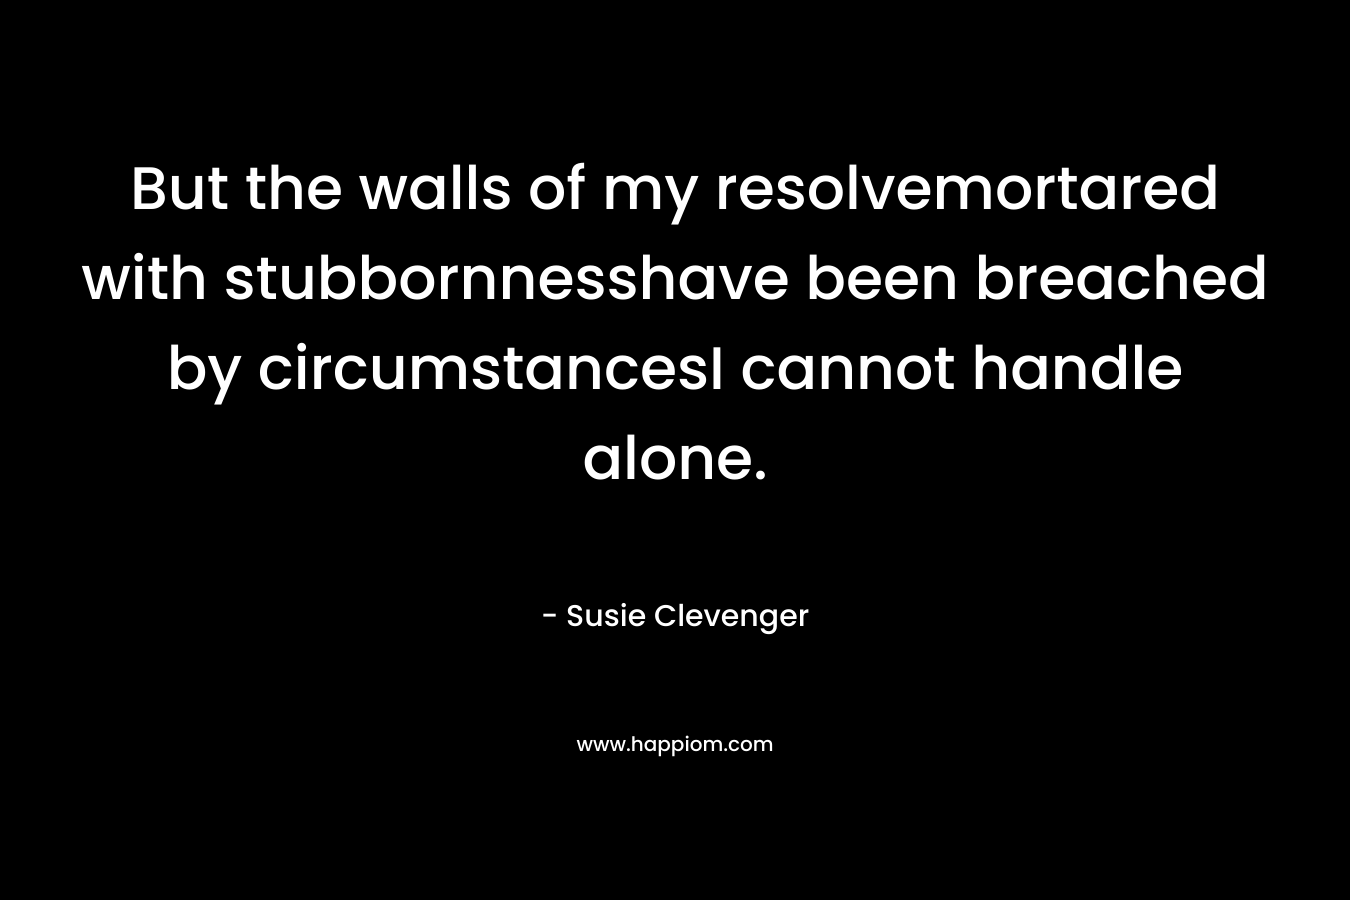 But the walls of my resolvemortared with stubbornnesshave been breached by circumstancesI cannot handle alone. – Susie Clevenger